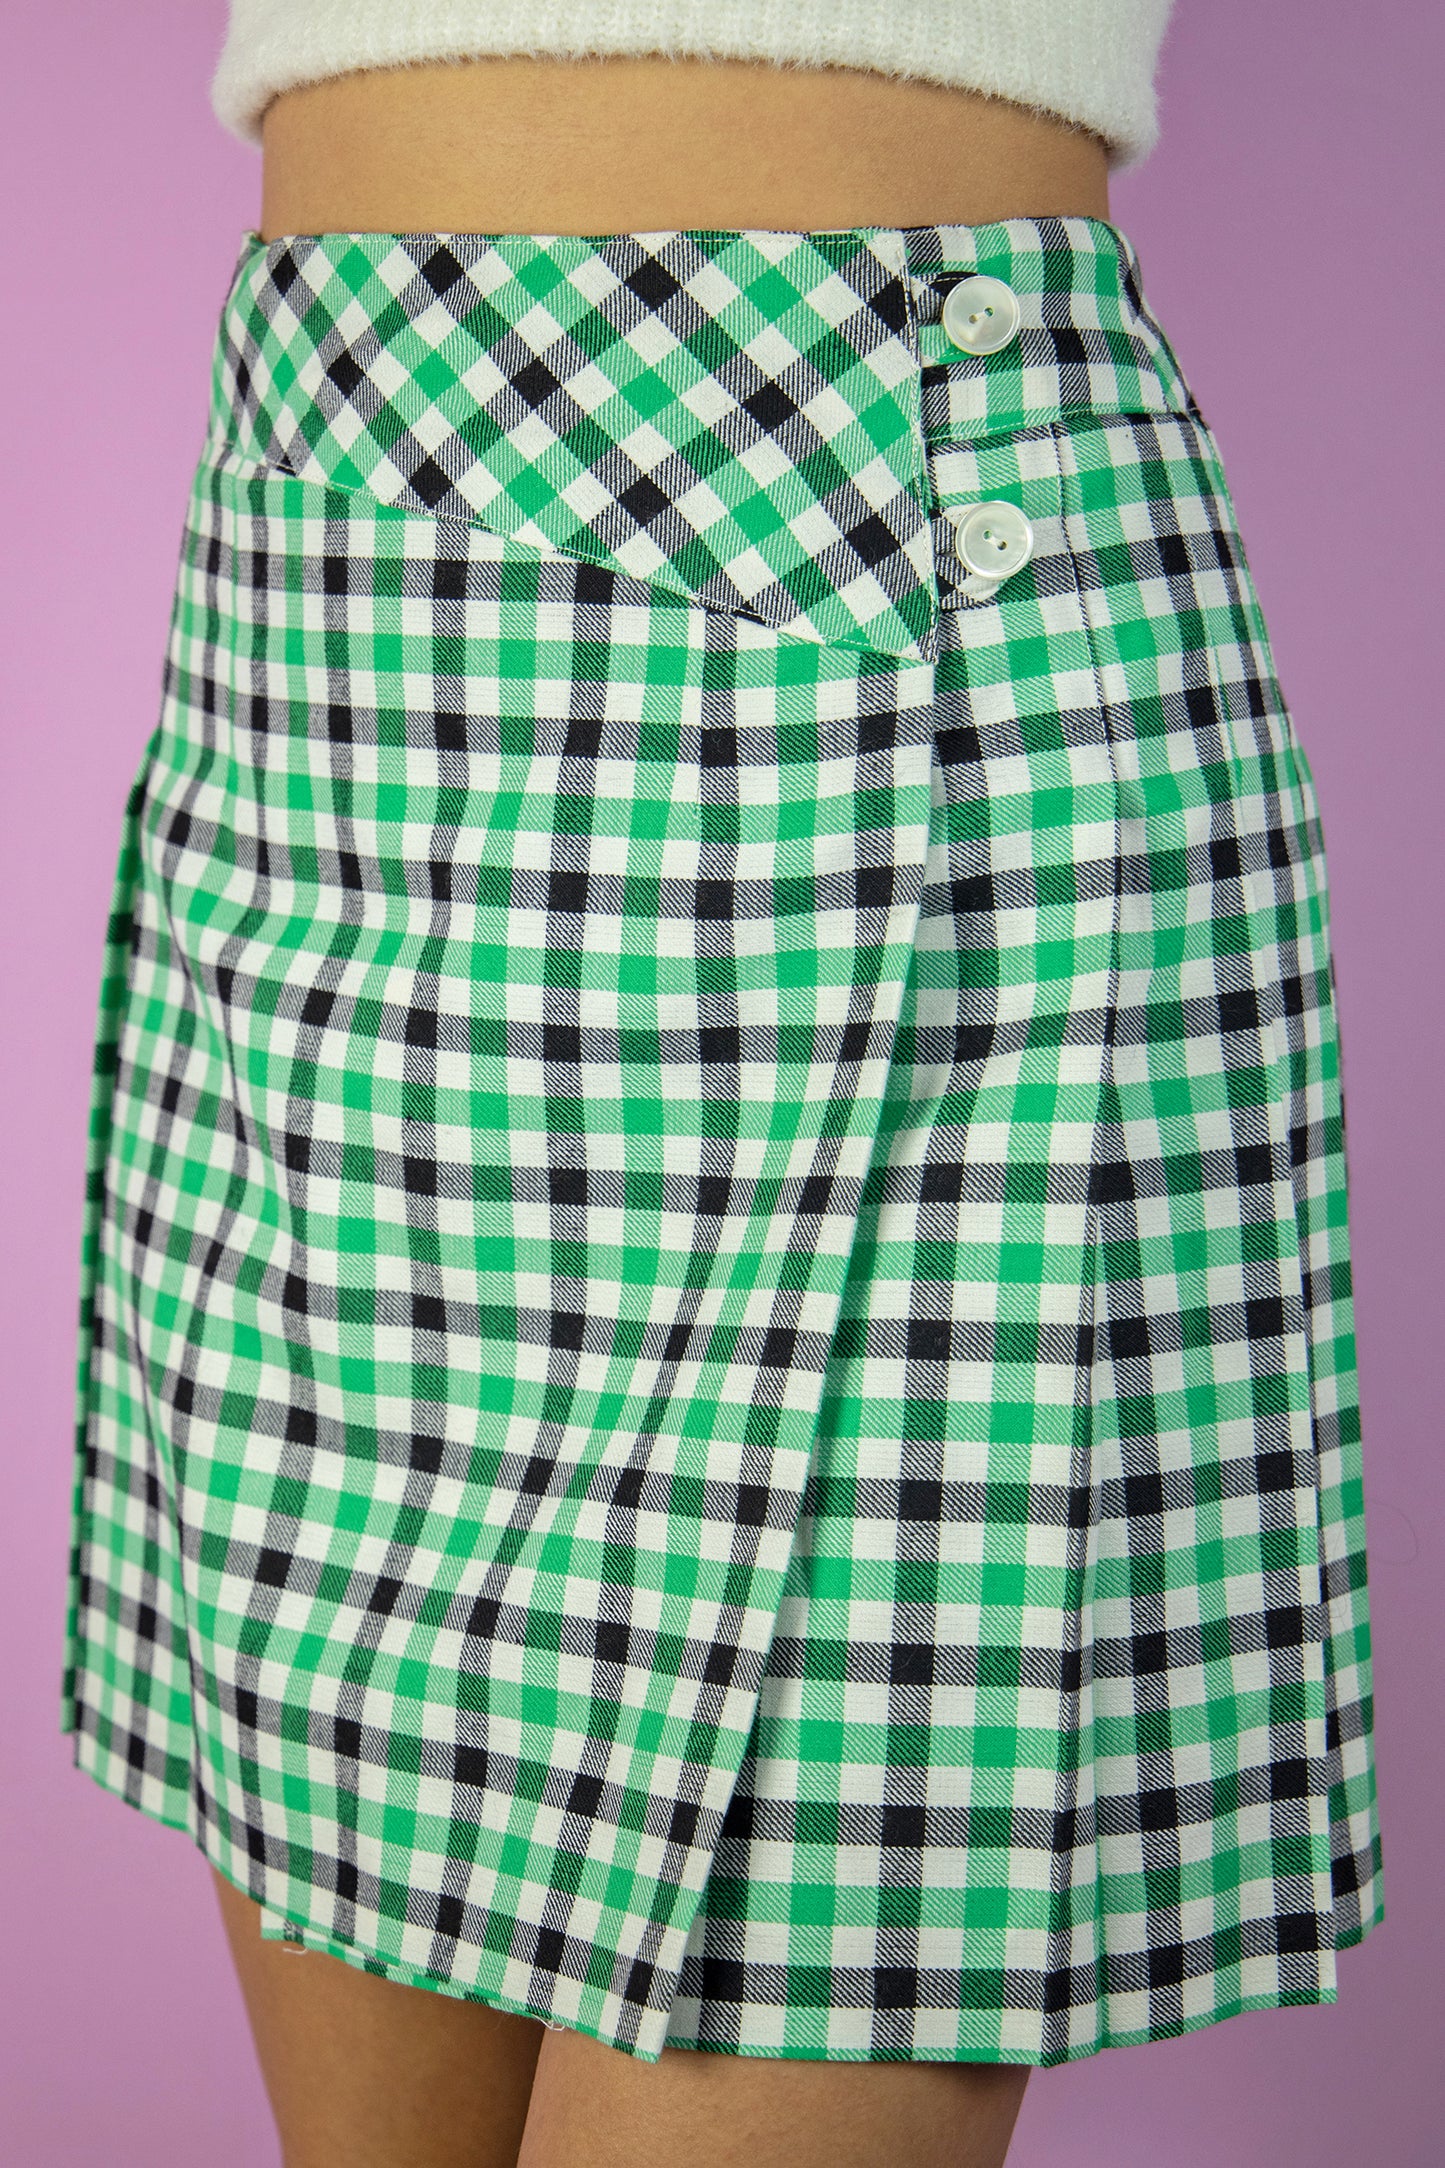 Vintage 80's Green Check Pleated Mini Skirt - XS/S